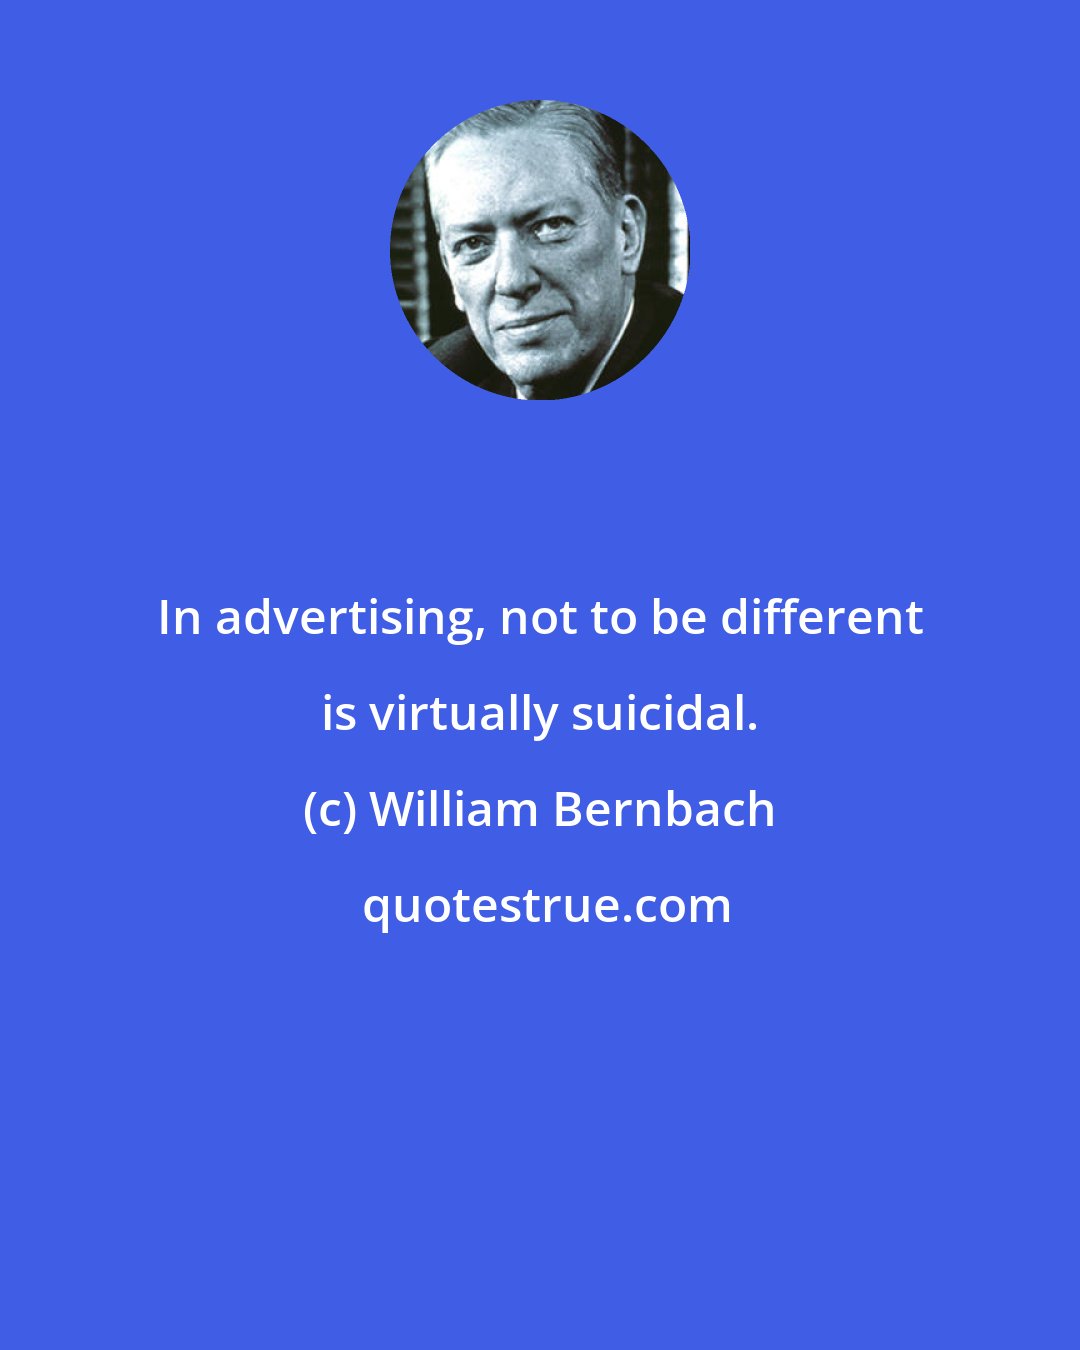 William Bernbach: In advertising, not to be different is virtually suicidal.